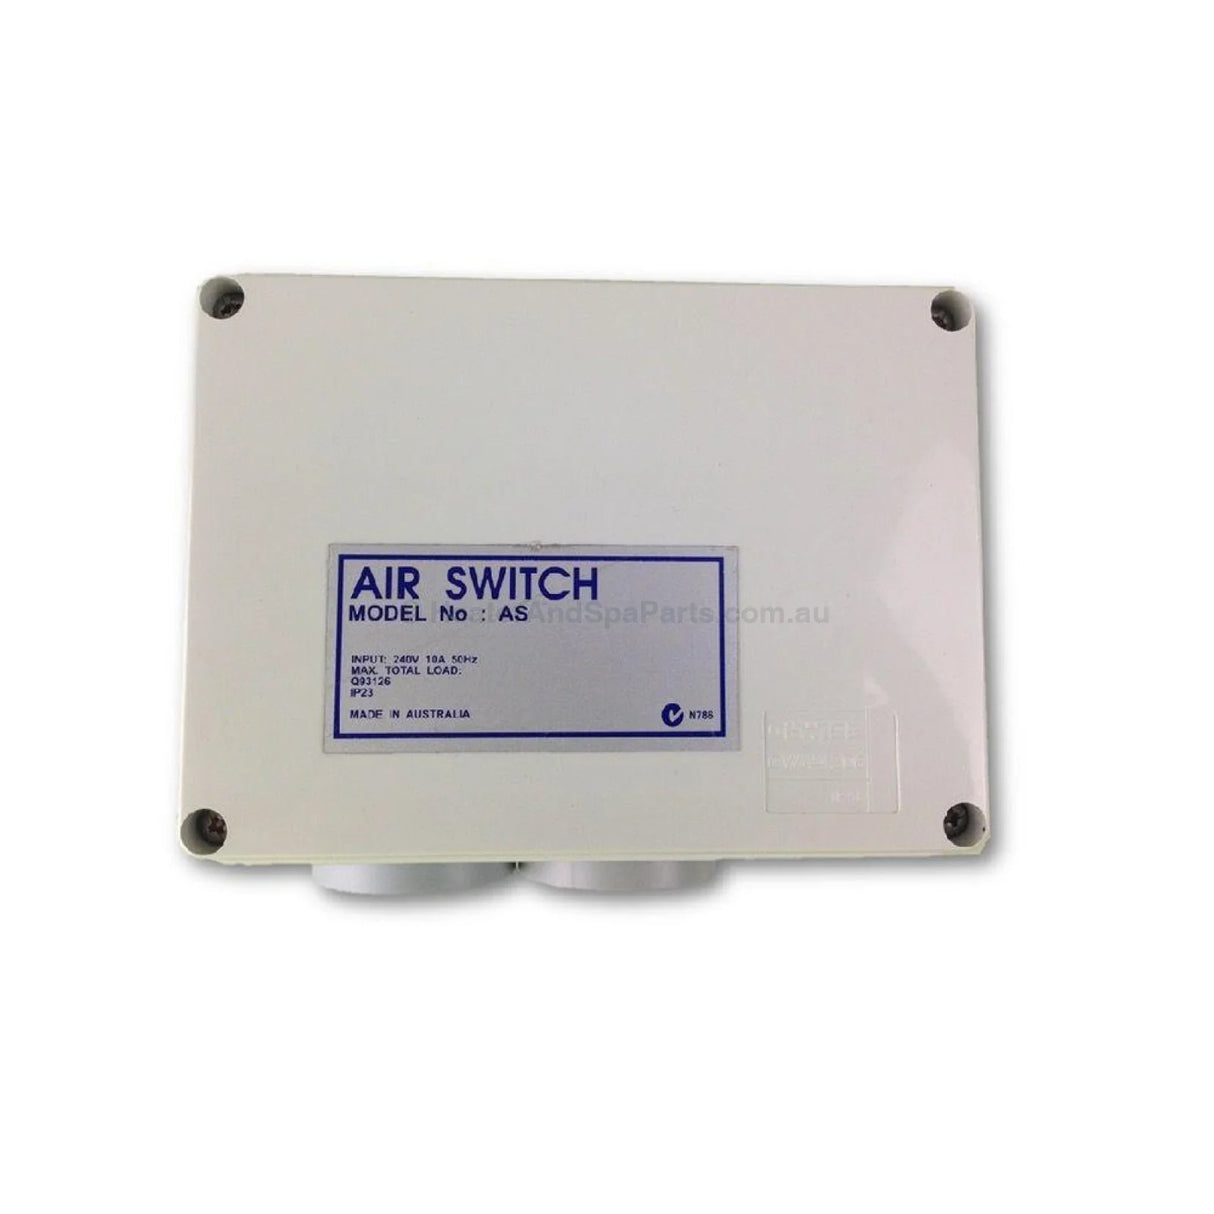 Air Switch - Double with NO time clock - Heater and Spa Parts